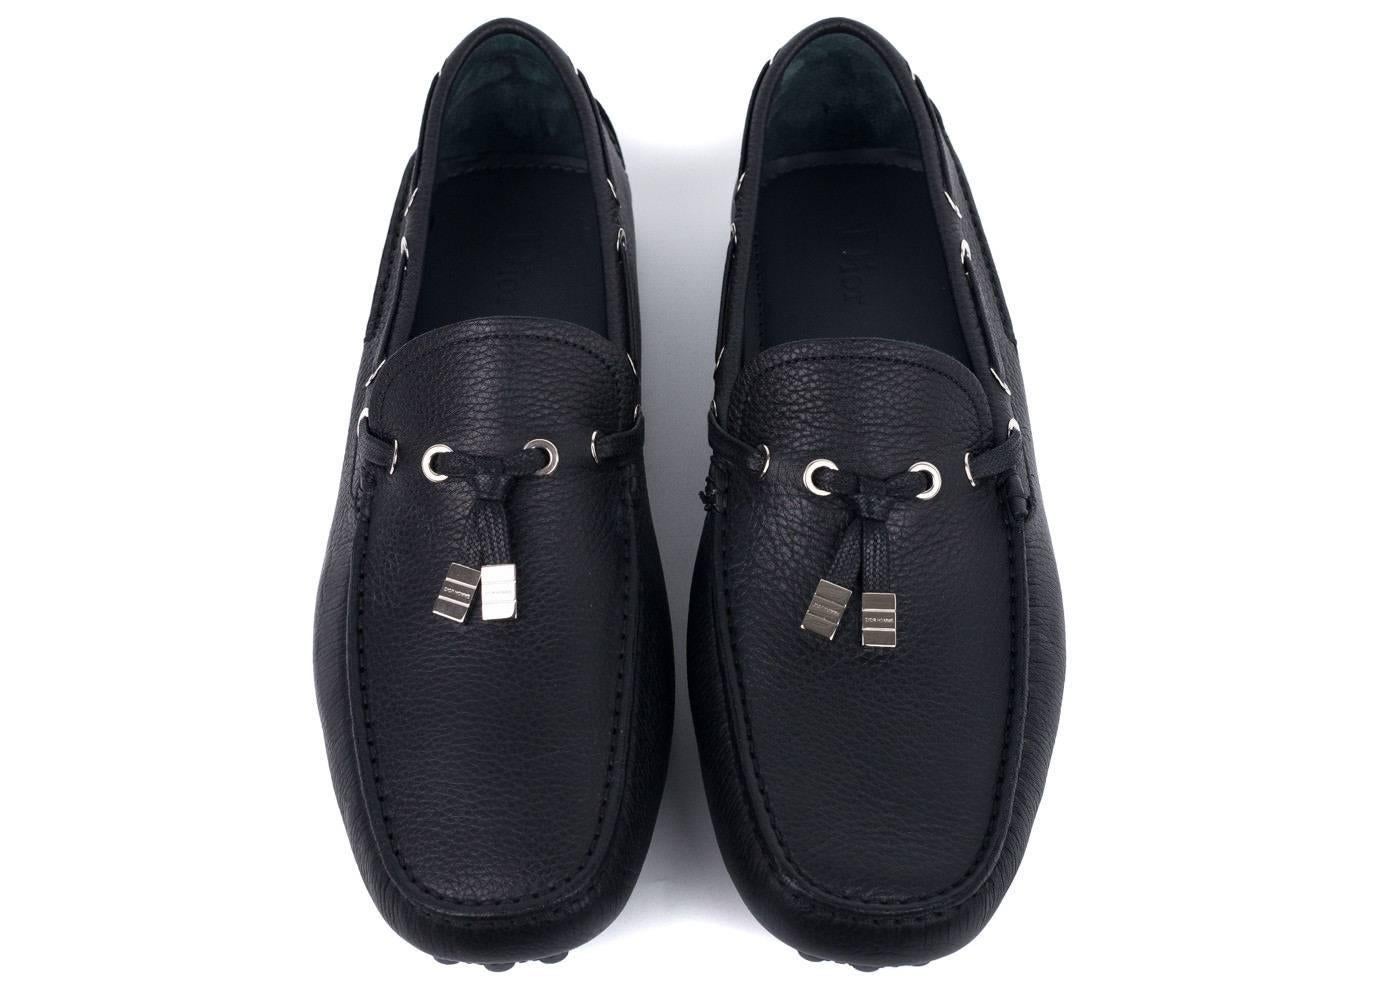 The most exclusive pair of loafers you will find, Dior Homme Black Clafskin Loafer. The French fashion house has redefined the classic loafer introducing a rich slightly pebbled leather, accented by silver hardware grommets and tassle, and a rubber